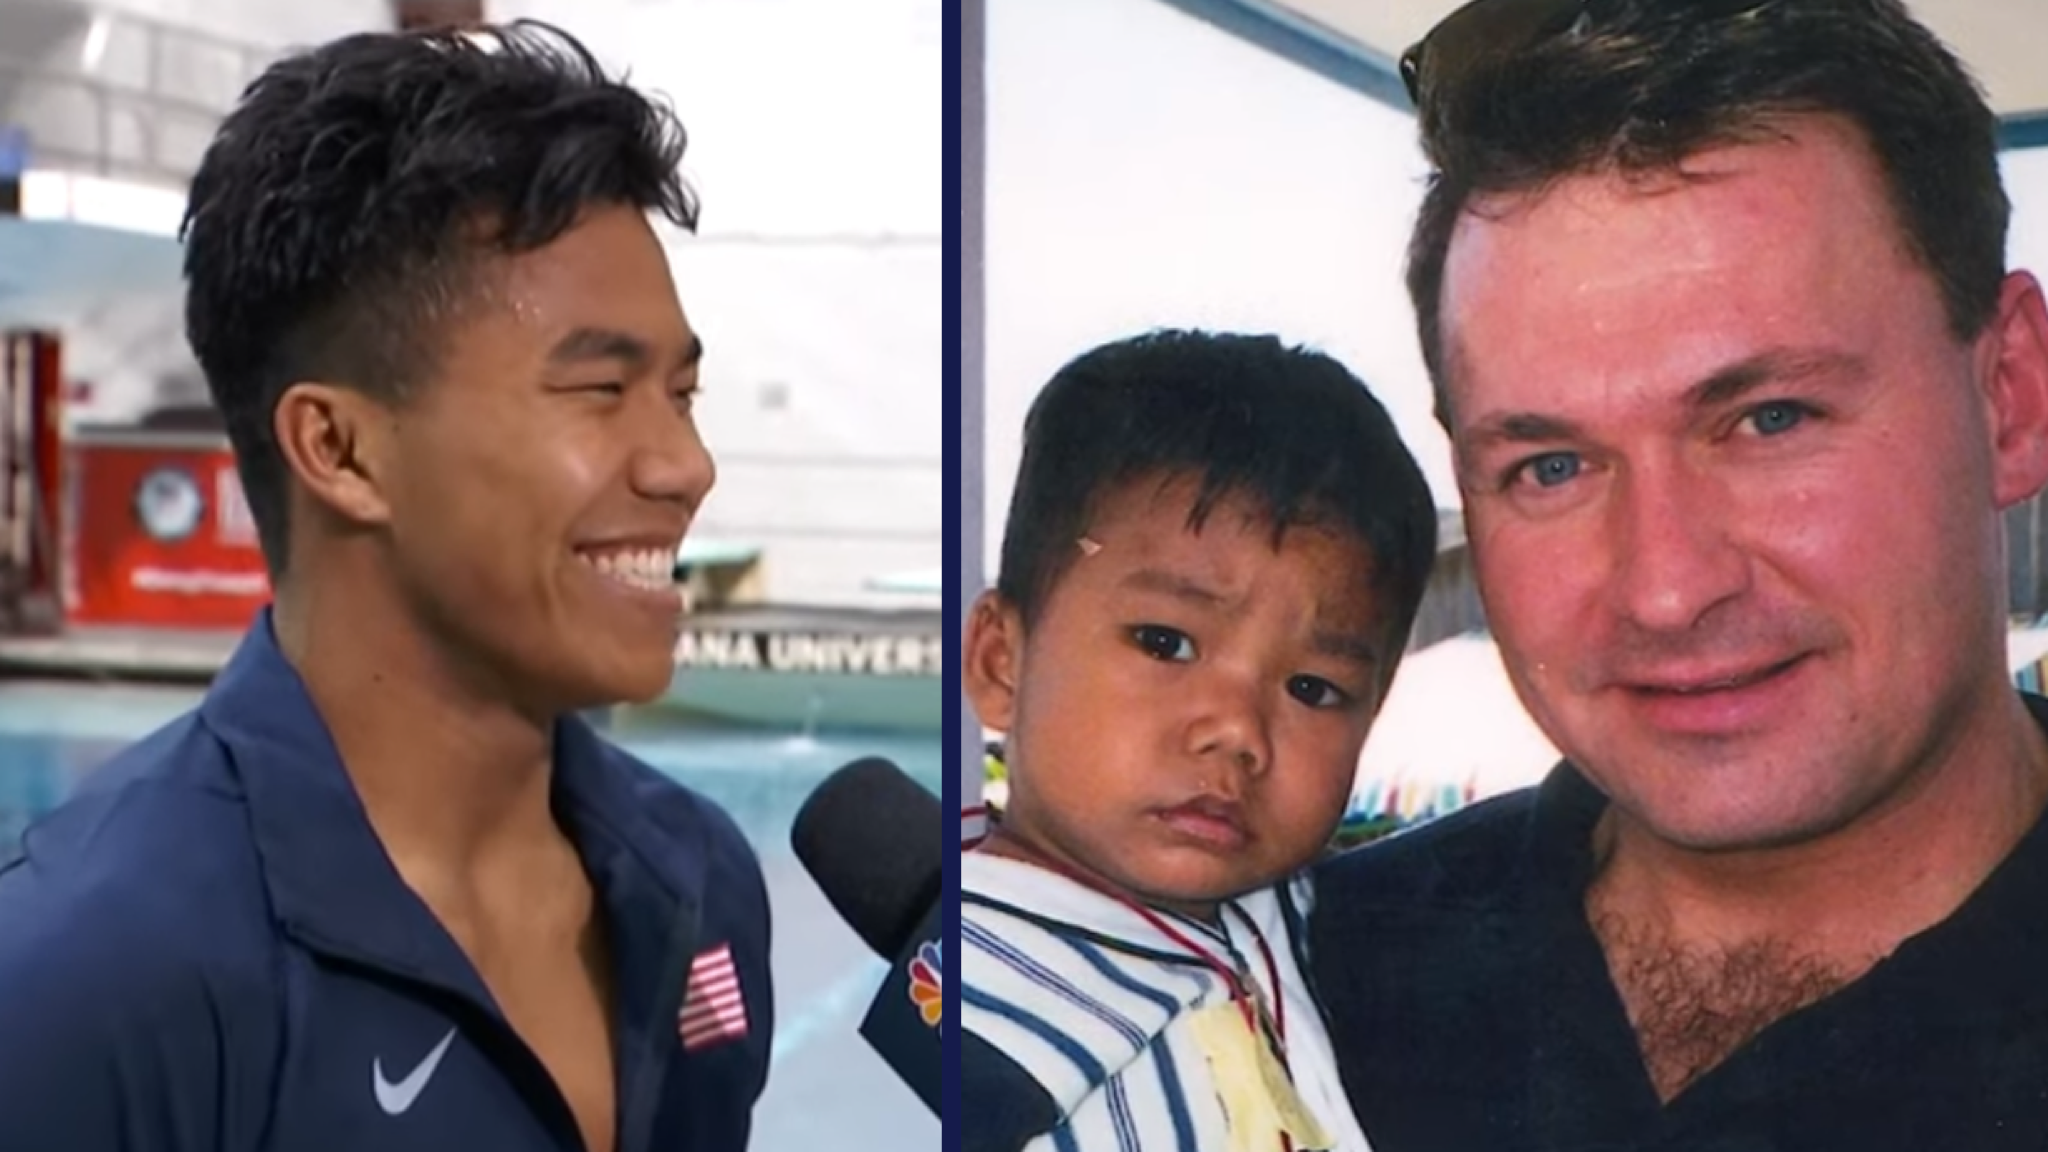 Olympic diver Jordan Windle (left) has always attributed his success to the love of his dad, Jerry, who adopted him from a Cambodian orphanage as a toddler.